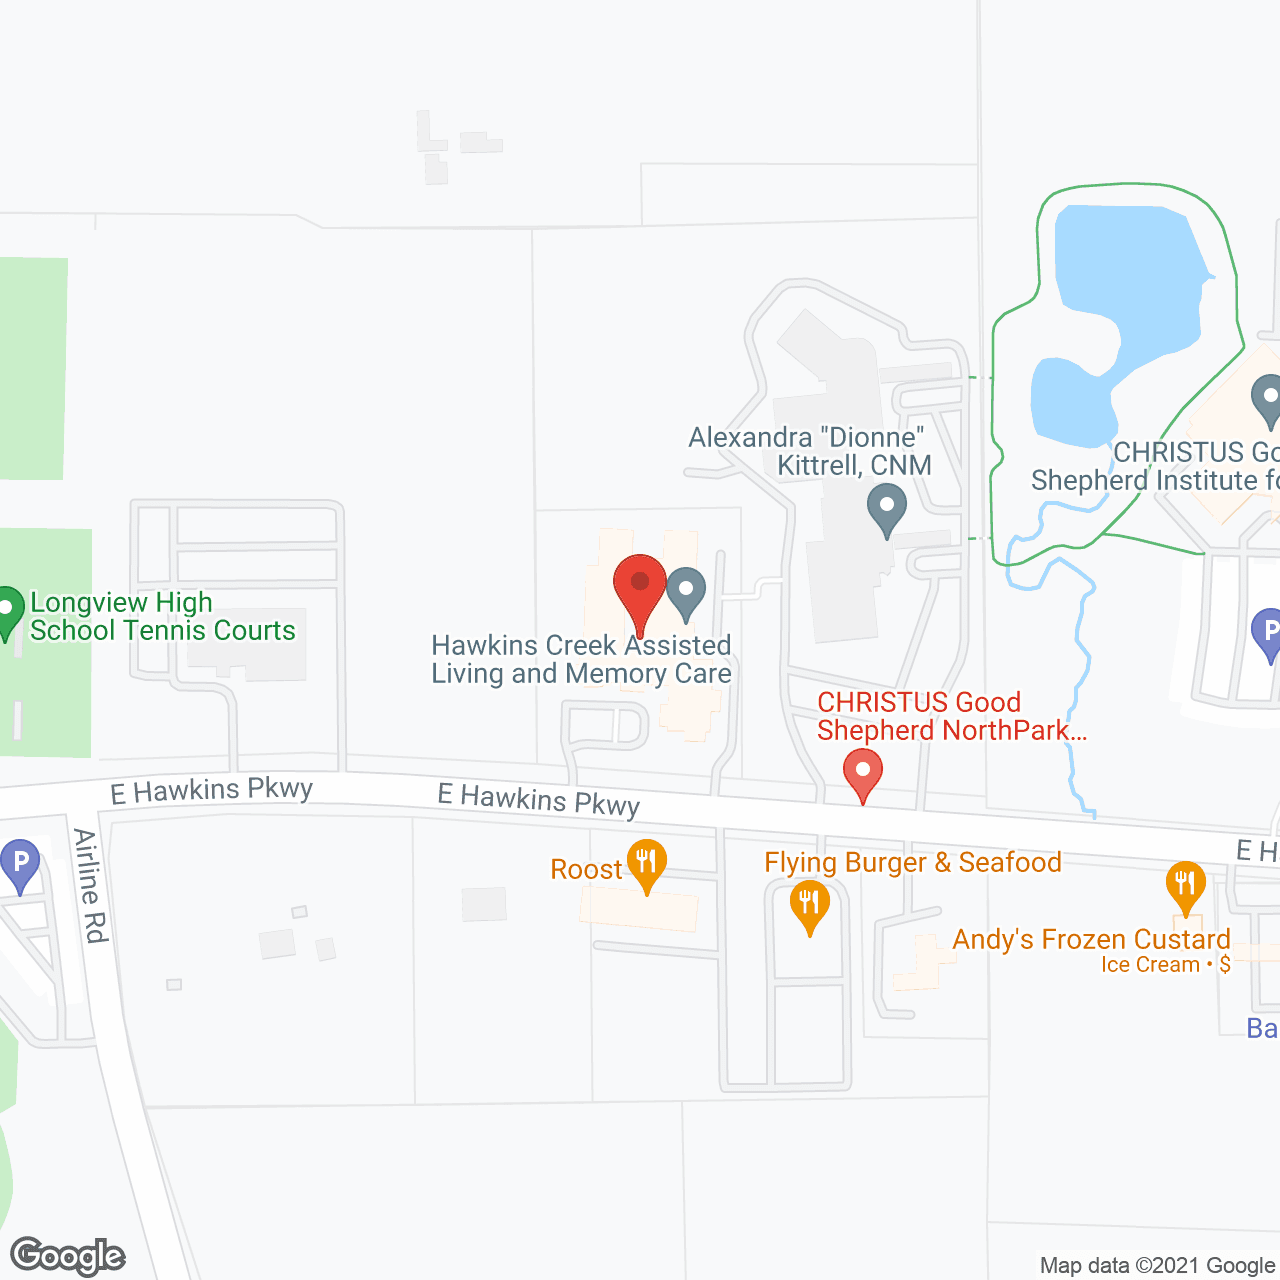 Hawkins Creek Assisted Living and Memory Care in google map